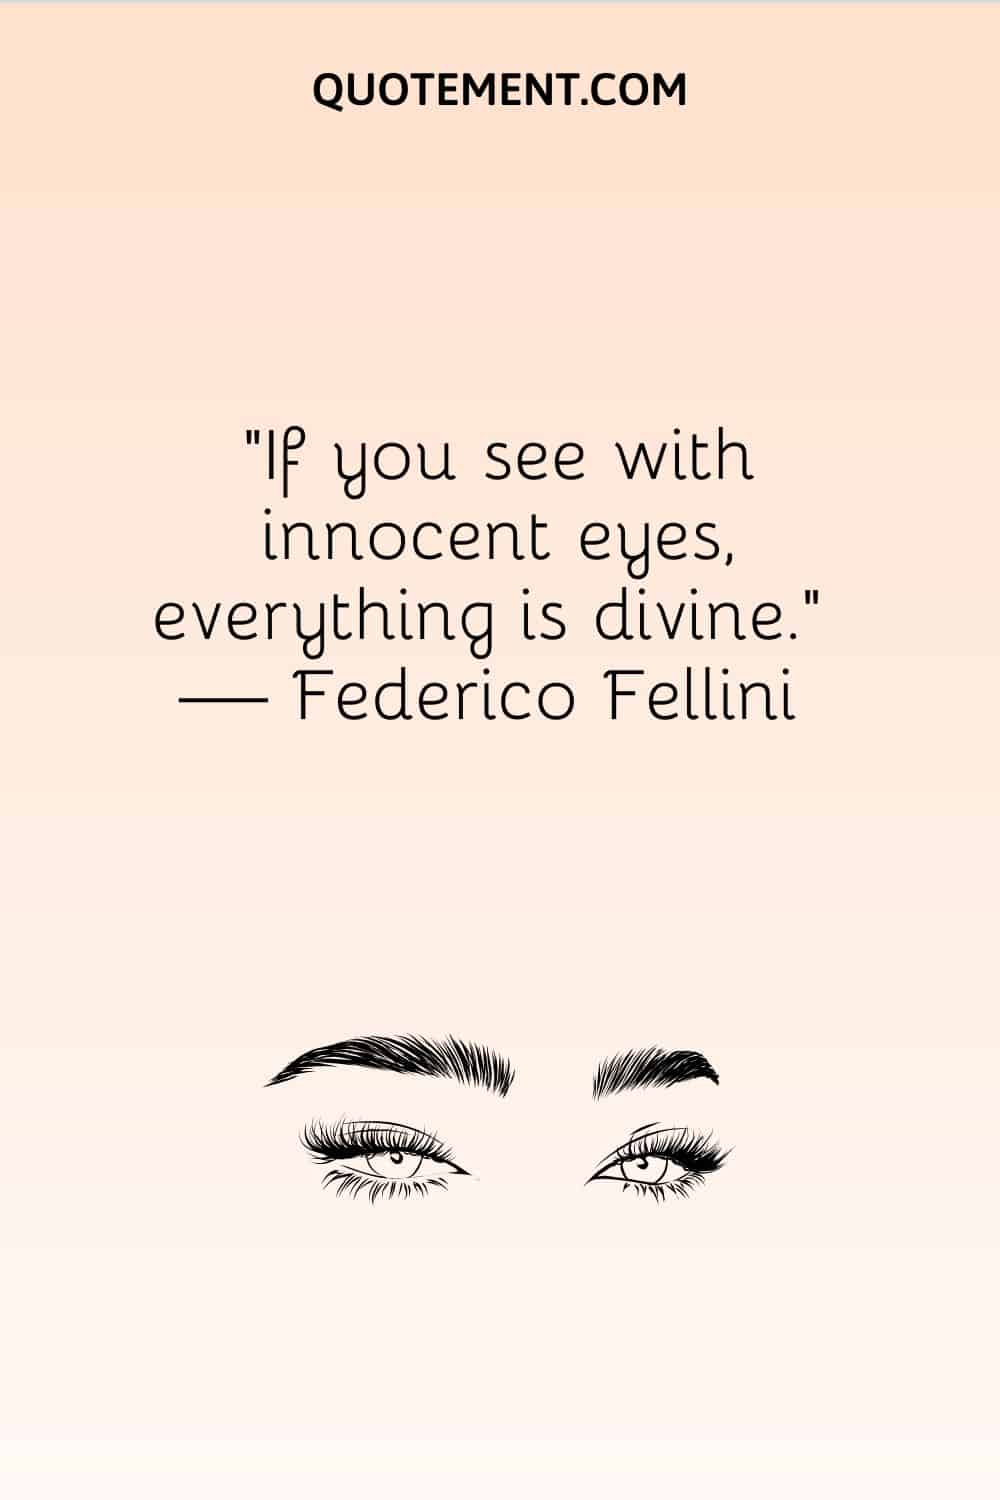 If you see with innocent eyes, everything is divine